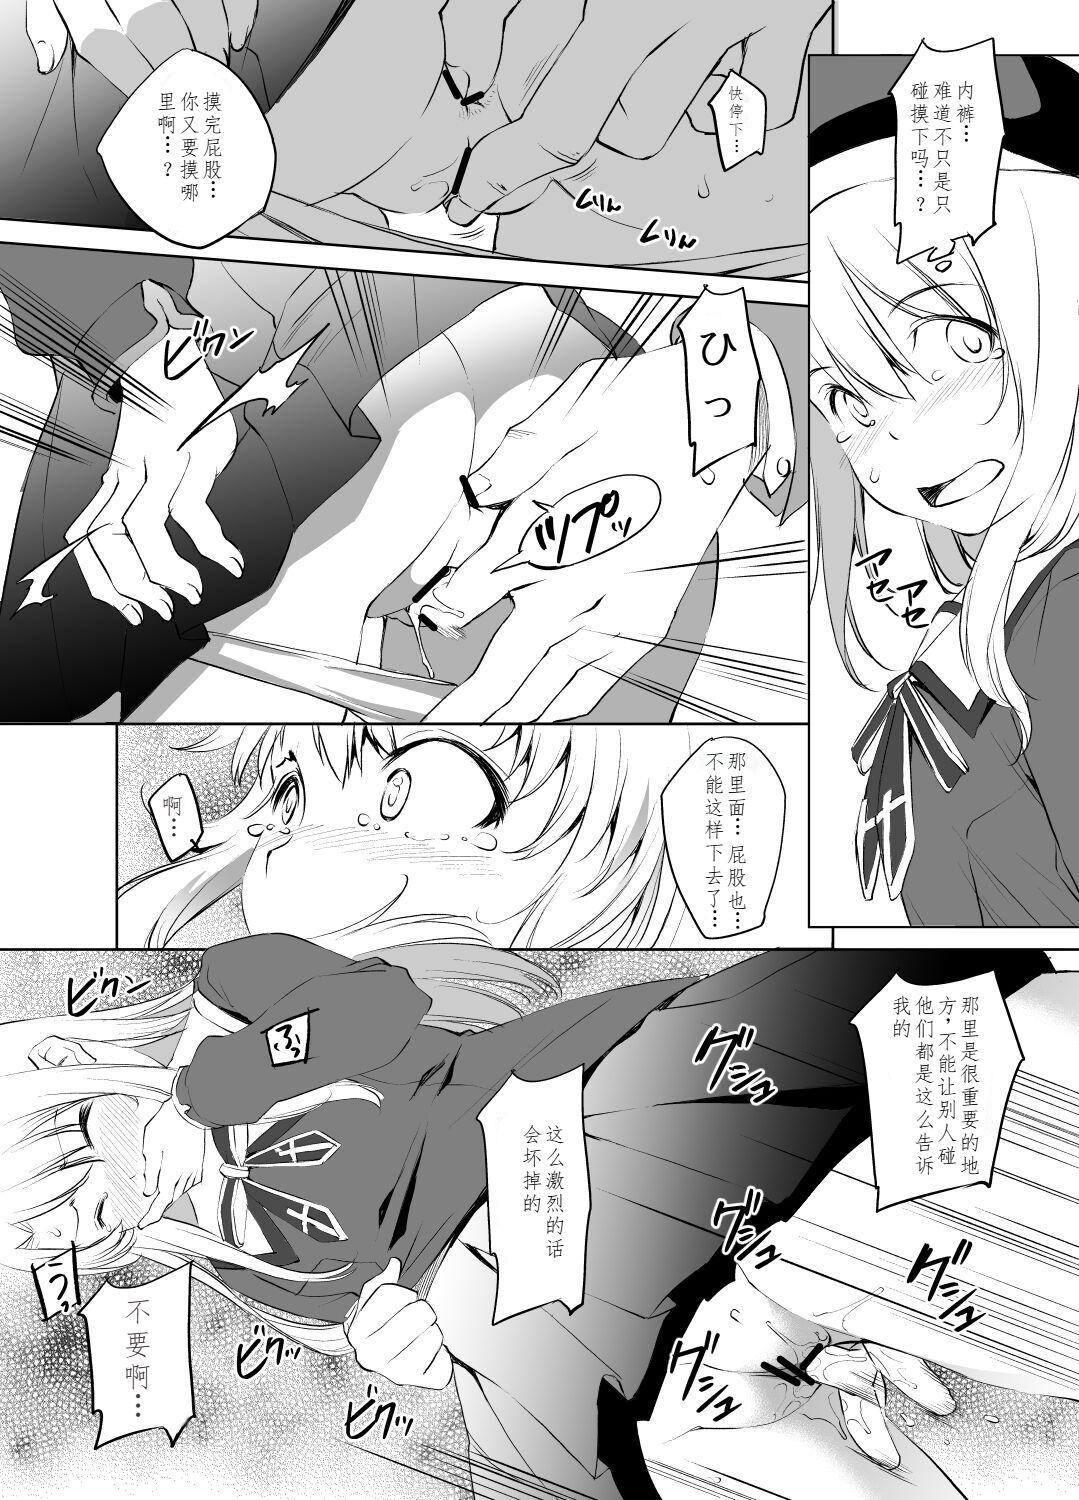 Monster Dick イリヤさん痴漢漫画 - Fate kaleid liner prisma illya Tight - Page 3